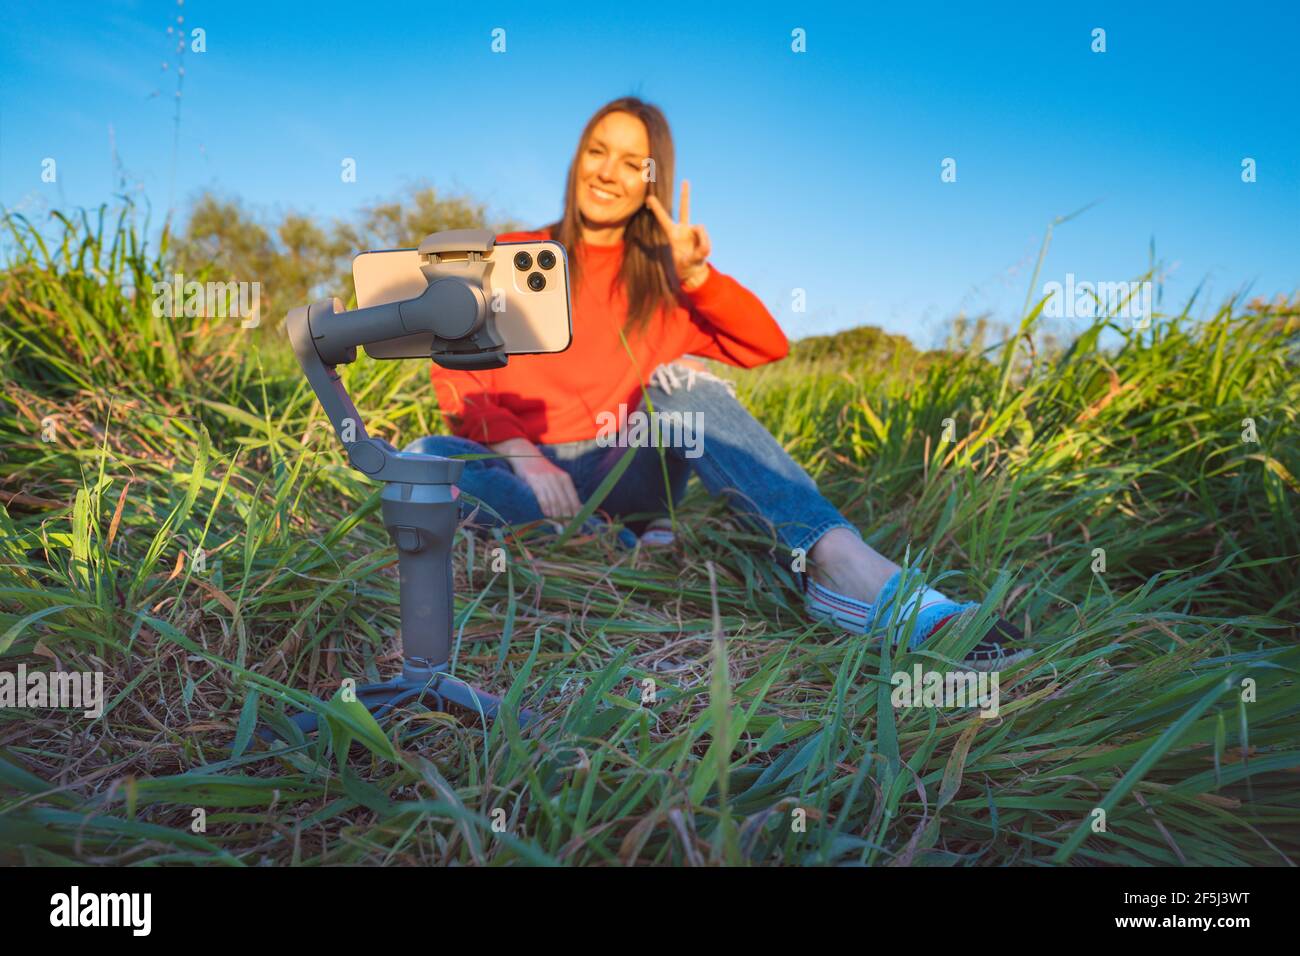 Woman vlogger sitting outside on the grass and live streaming with phone and gimbal. Taking pictures and live video. Blogging. Stock Photo